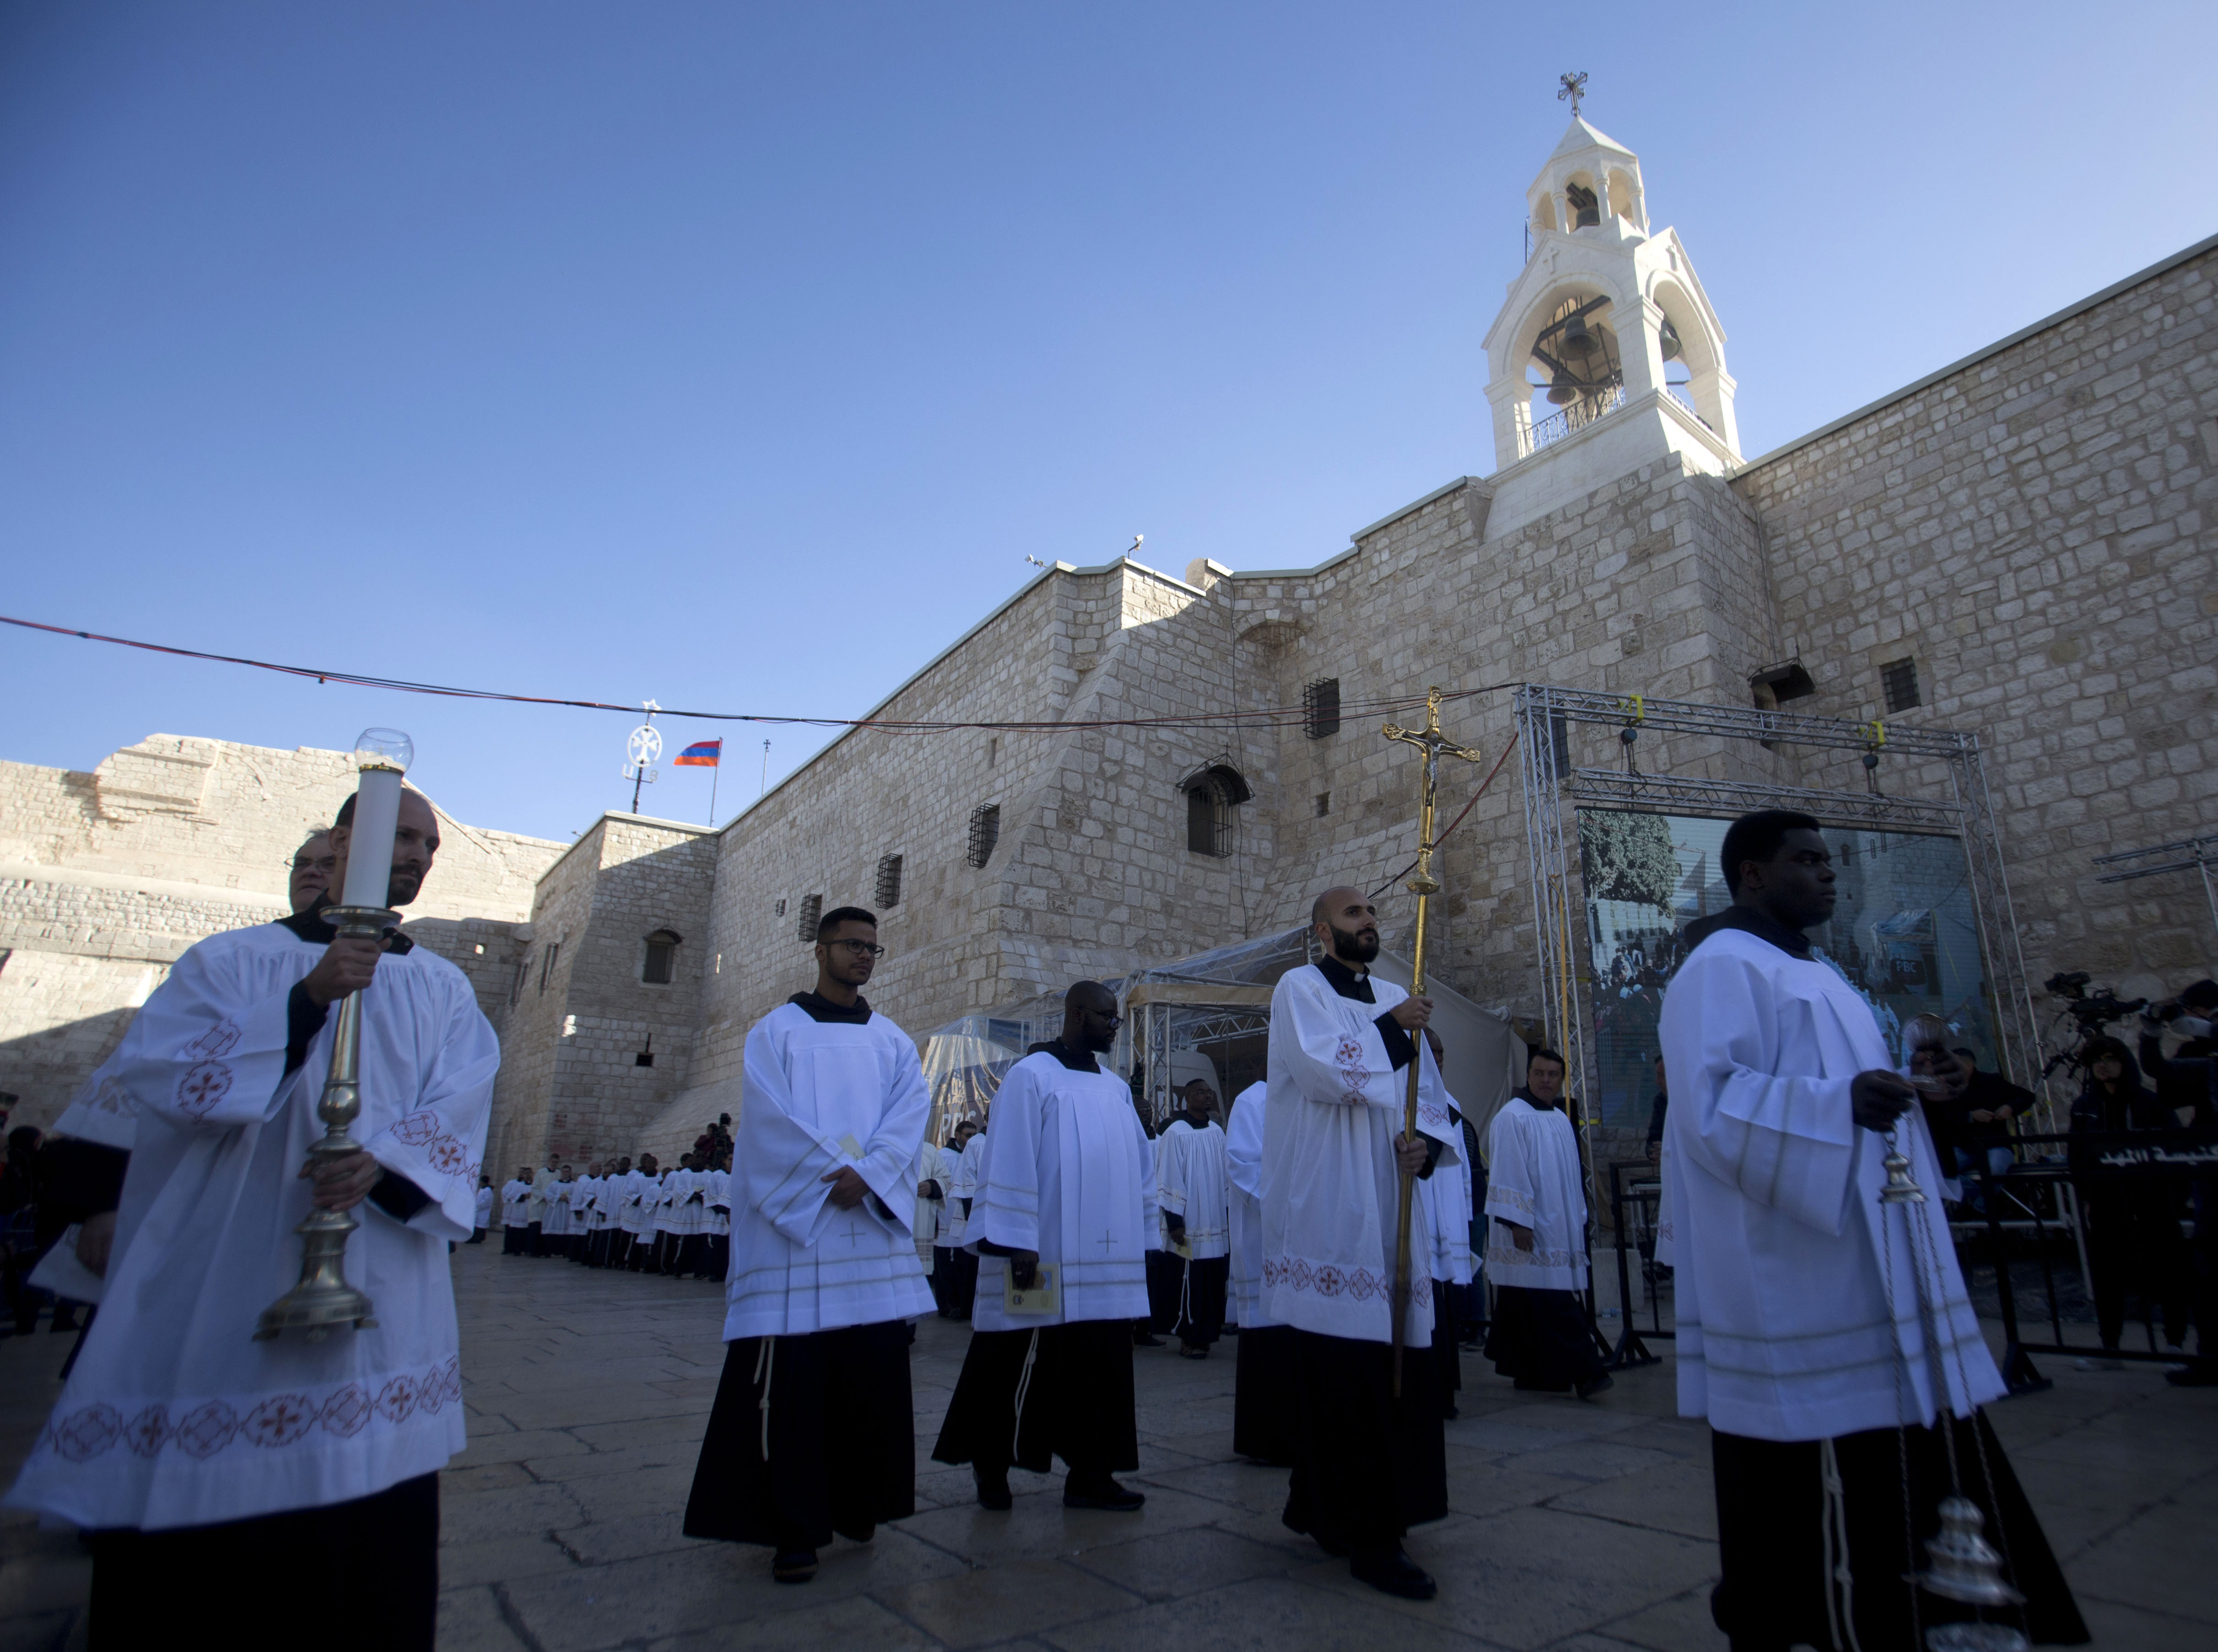 Clergymen participate in Christmas celebrations outside the Church of the Nativity, built atop the site where Christians believe Jesus Christ was born, on Christmas Eve, in the West Bank City of Bethlehem, Tuesday, Dec. 24, 2019. (AP Photo/Majdi Mohammed)